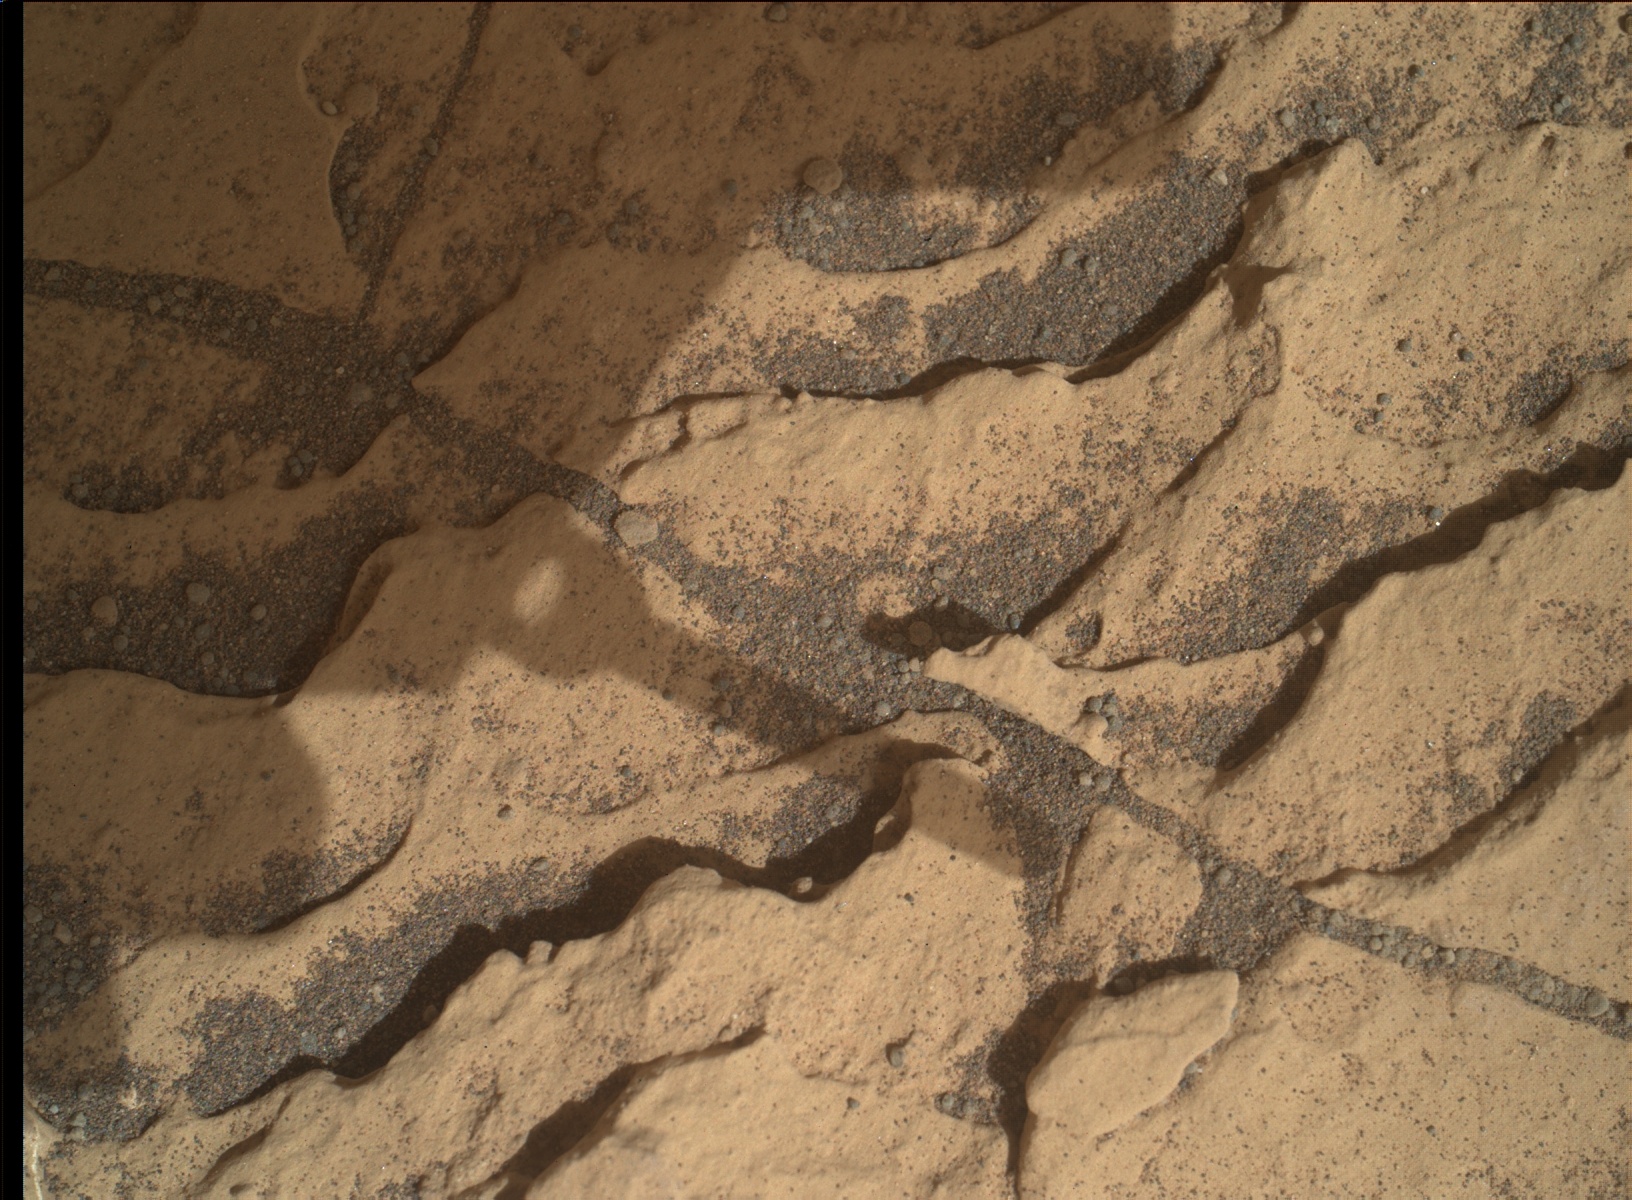 Nasa's Mars rover Curiosity acquired this image using its Mars Hand Lens Imager (MAHLI) on Sol 1691